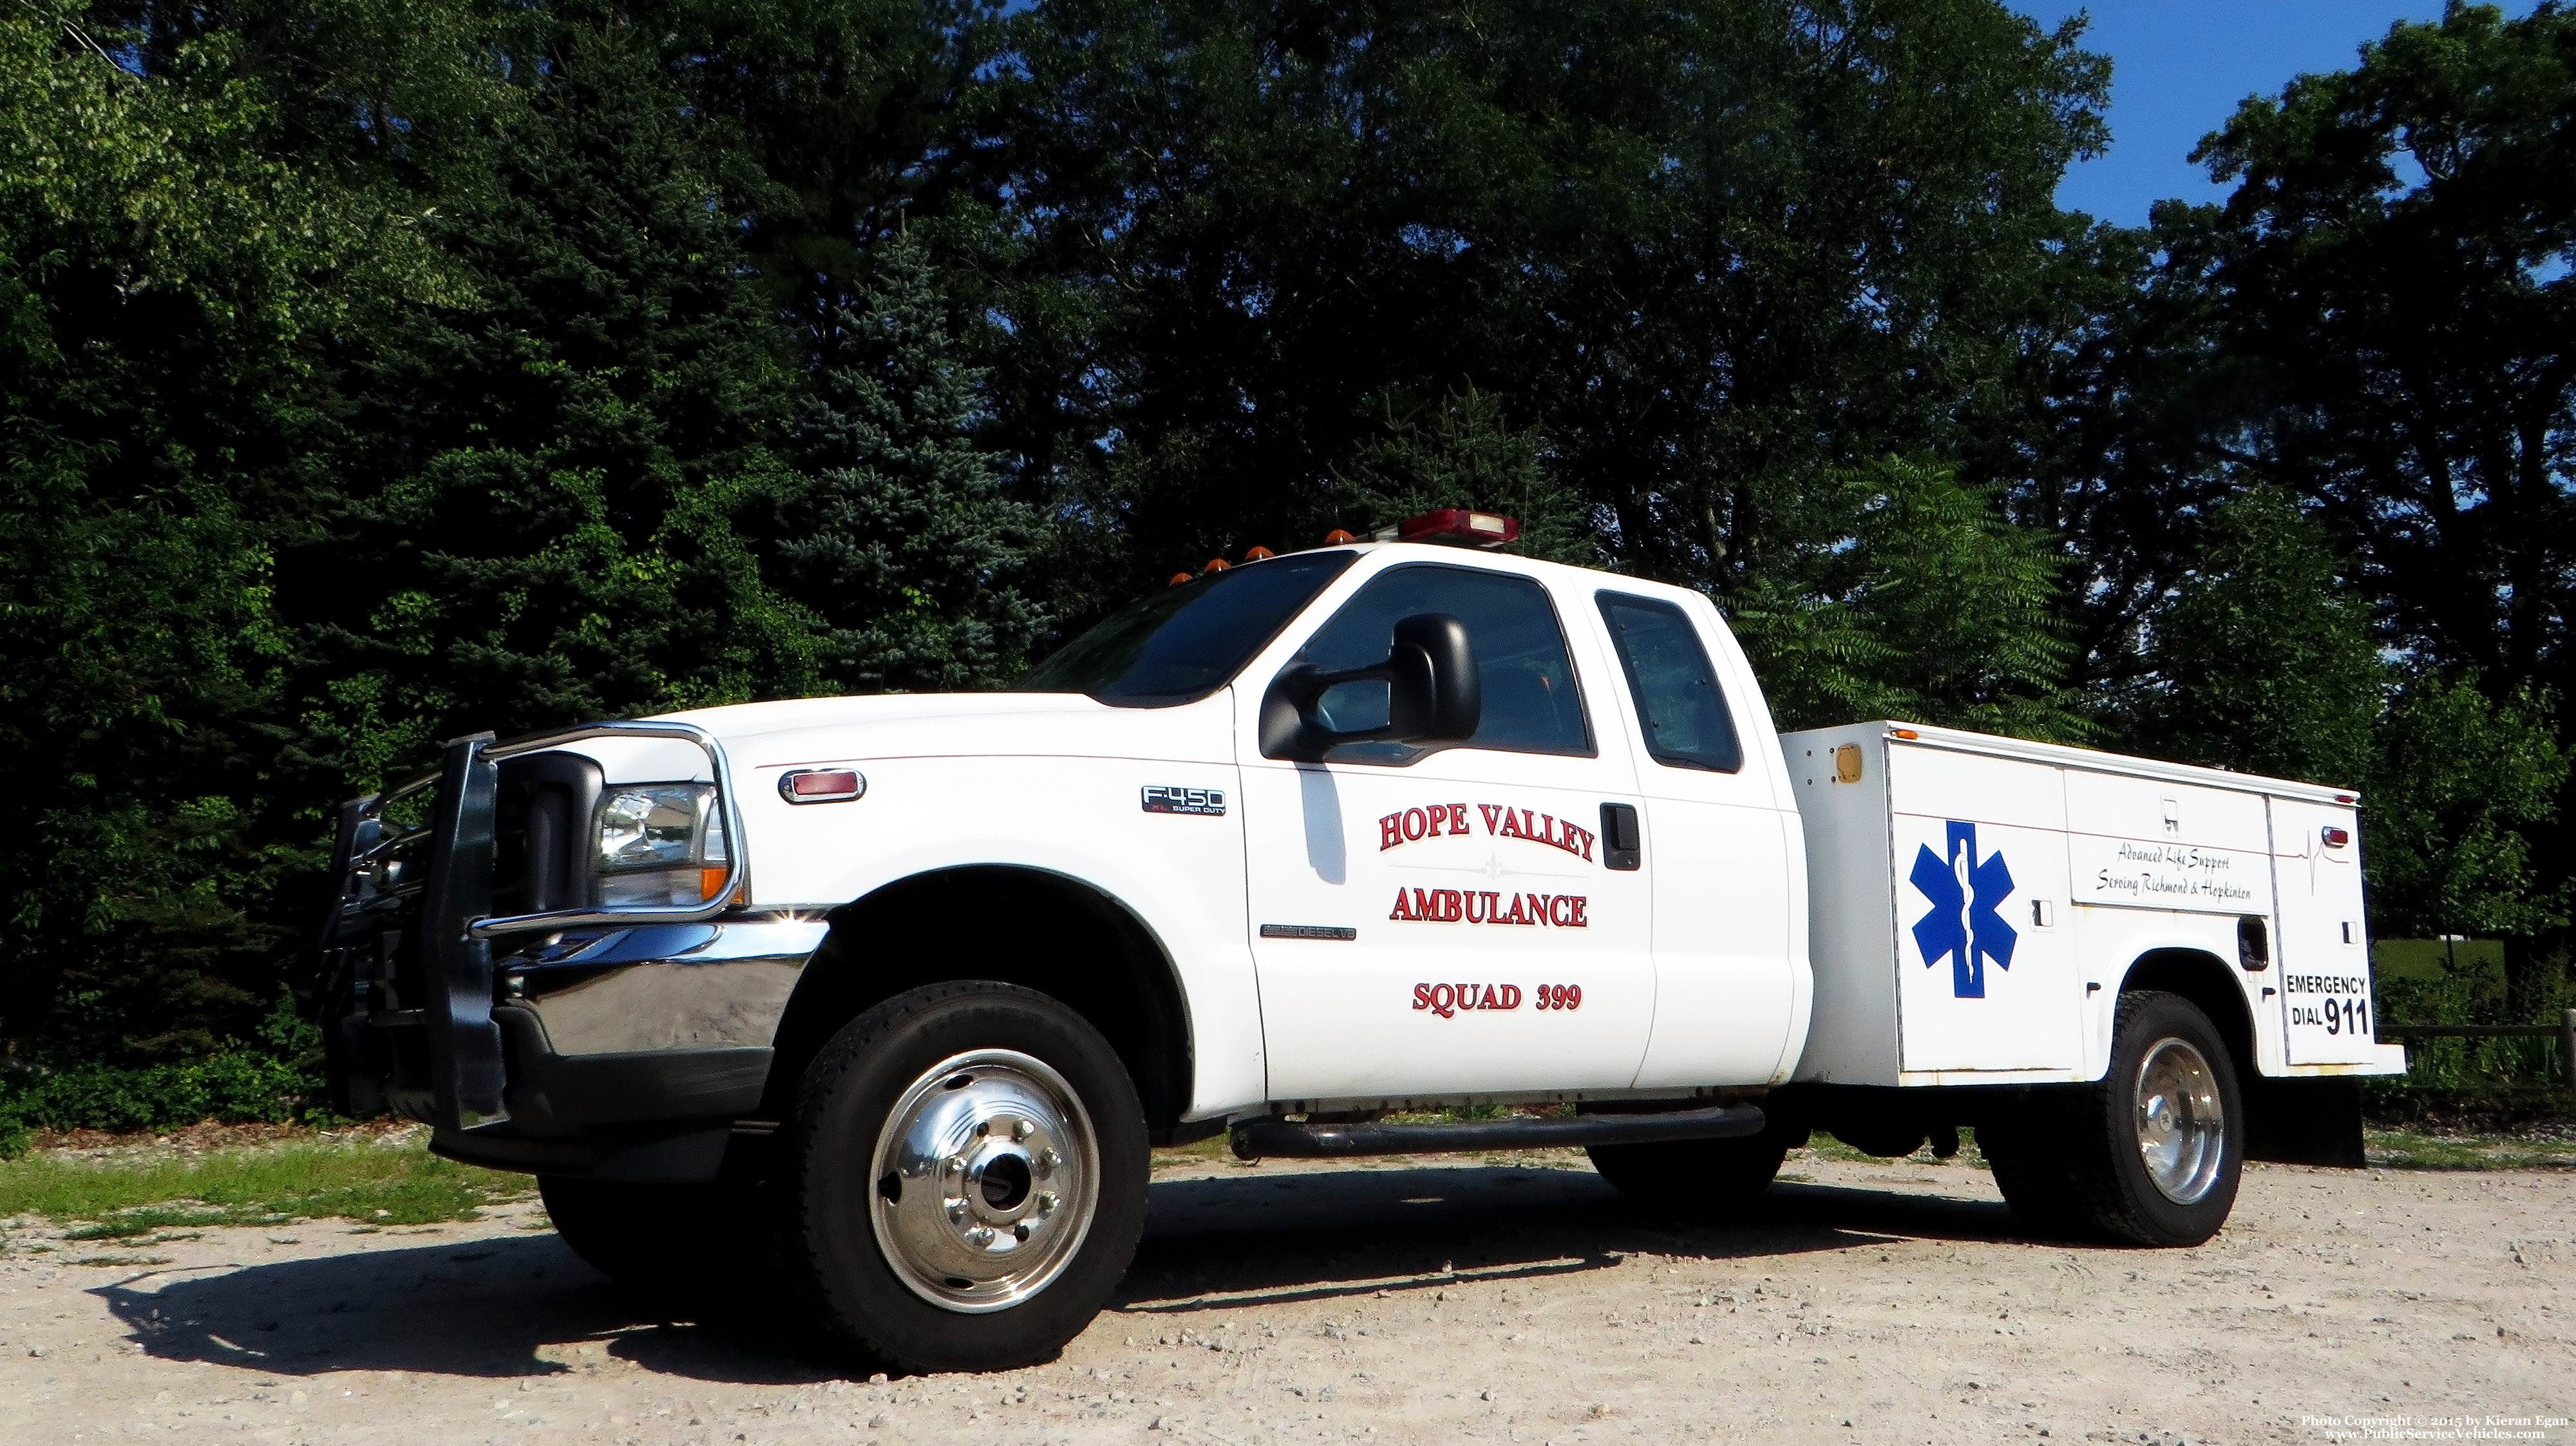 A photo  of Hope Valley Ambulance Squad
            Squad 399, a 2002 Ford F-350             taken by Kieran Egan